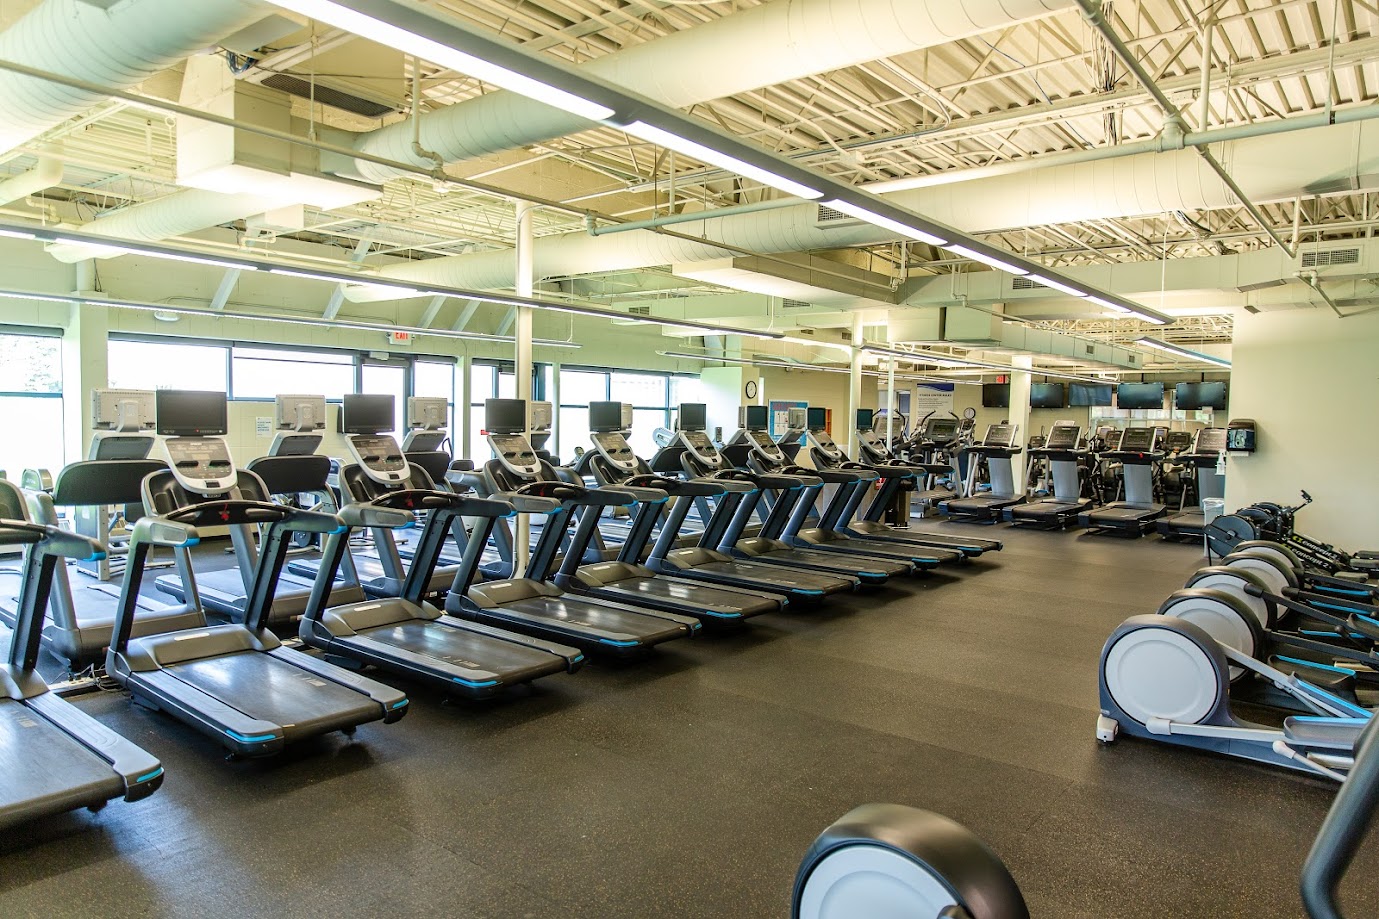 Southwest_Large Room with Treadmills and Rowing Machines